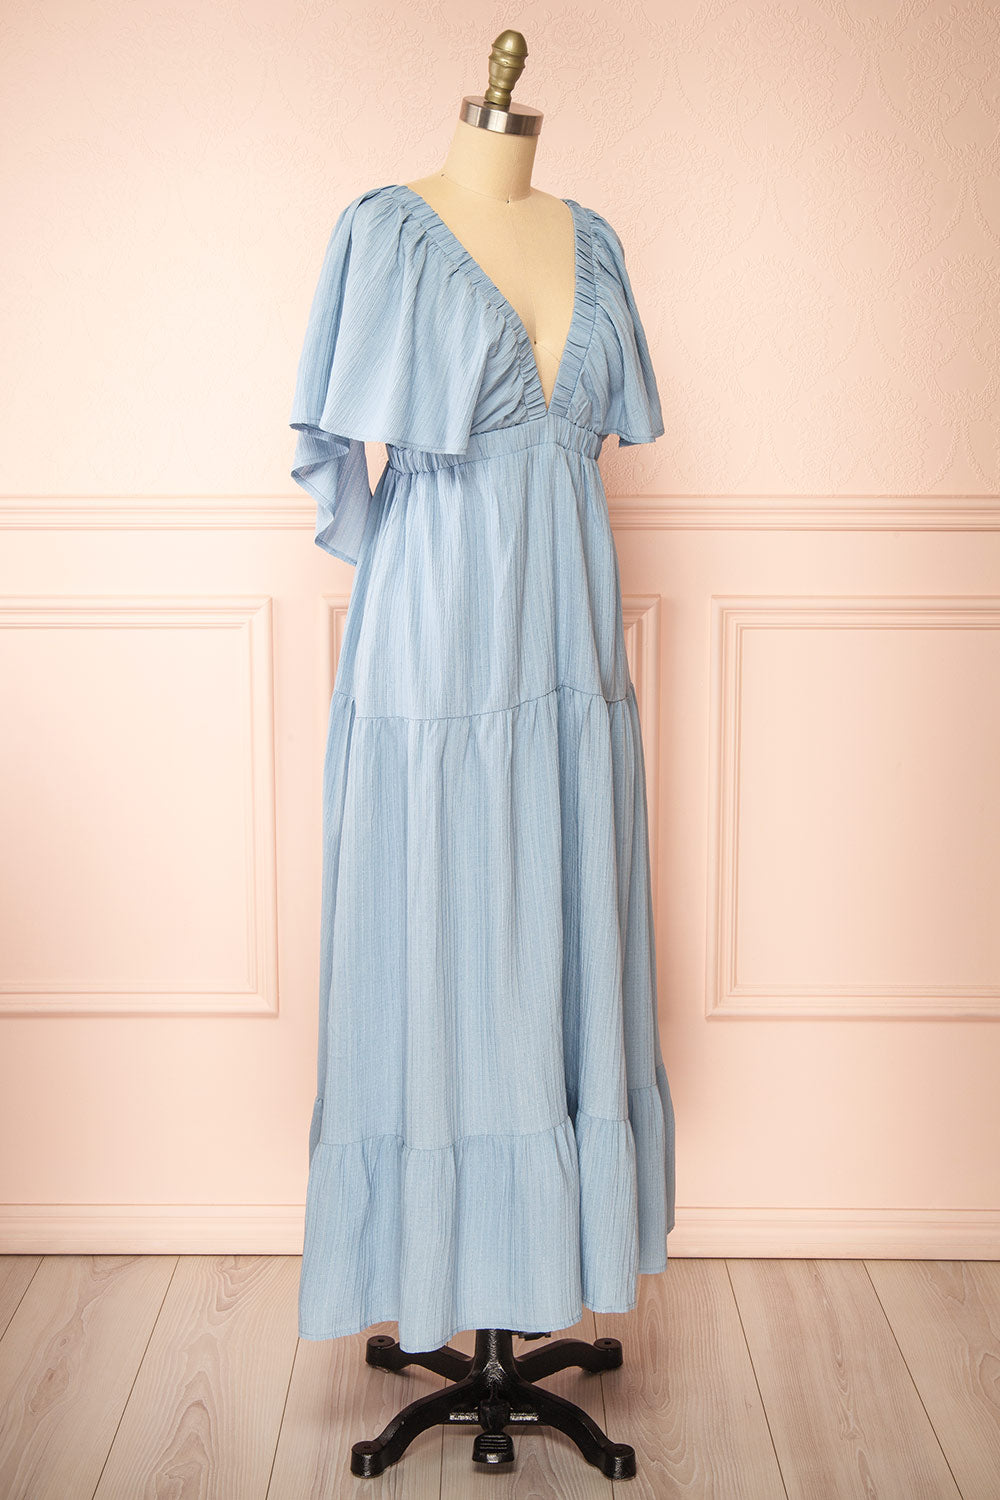 Damiana Long Blue Dress w/ Plunging Neckline | Boutique 1861 side view